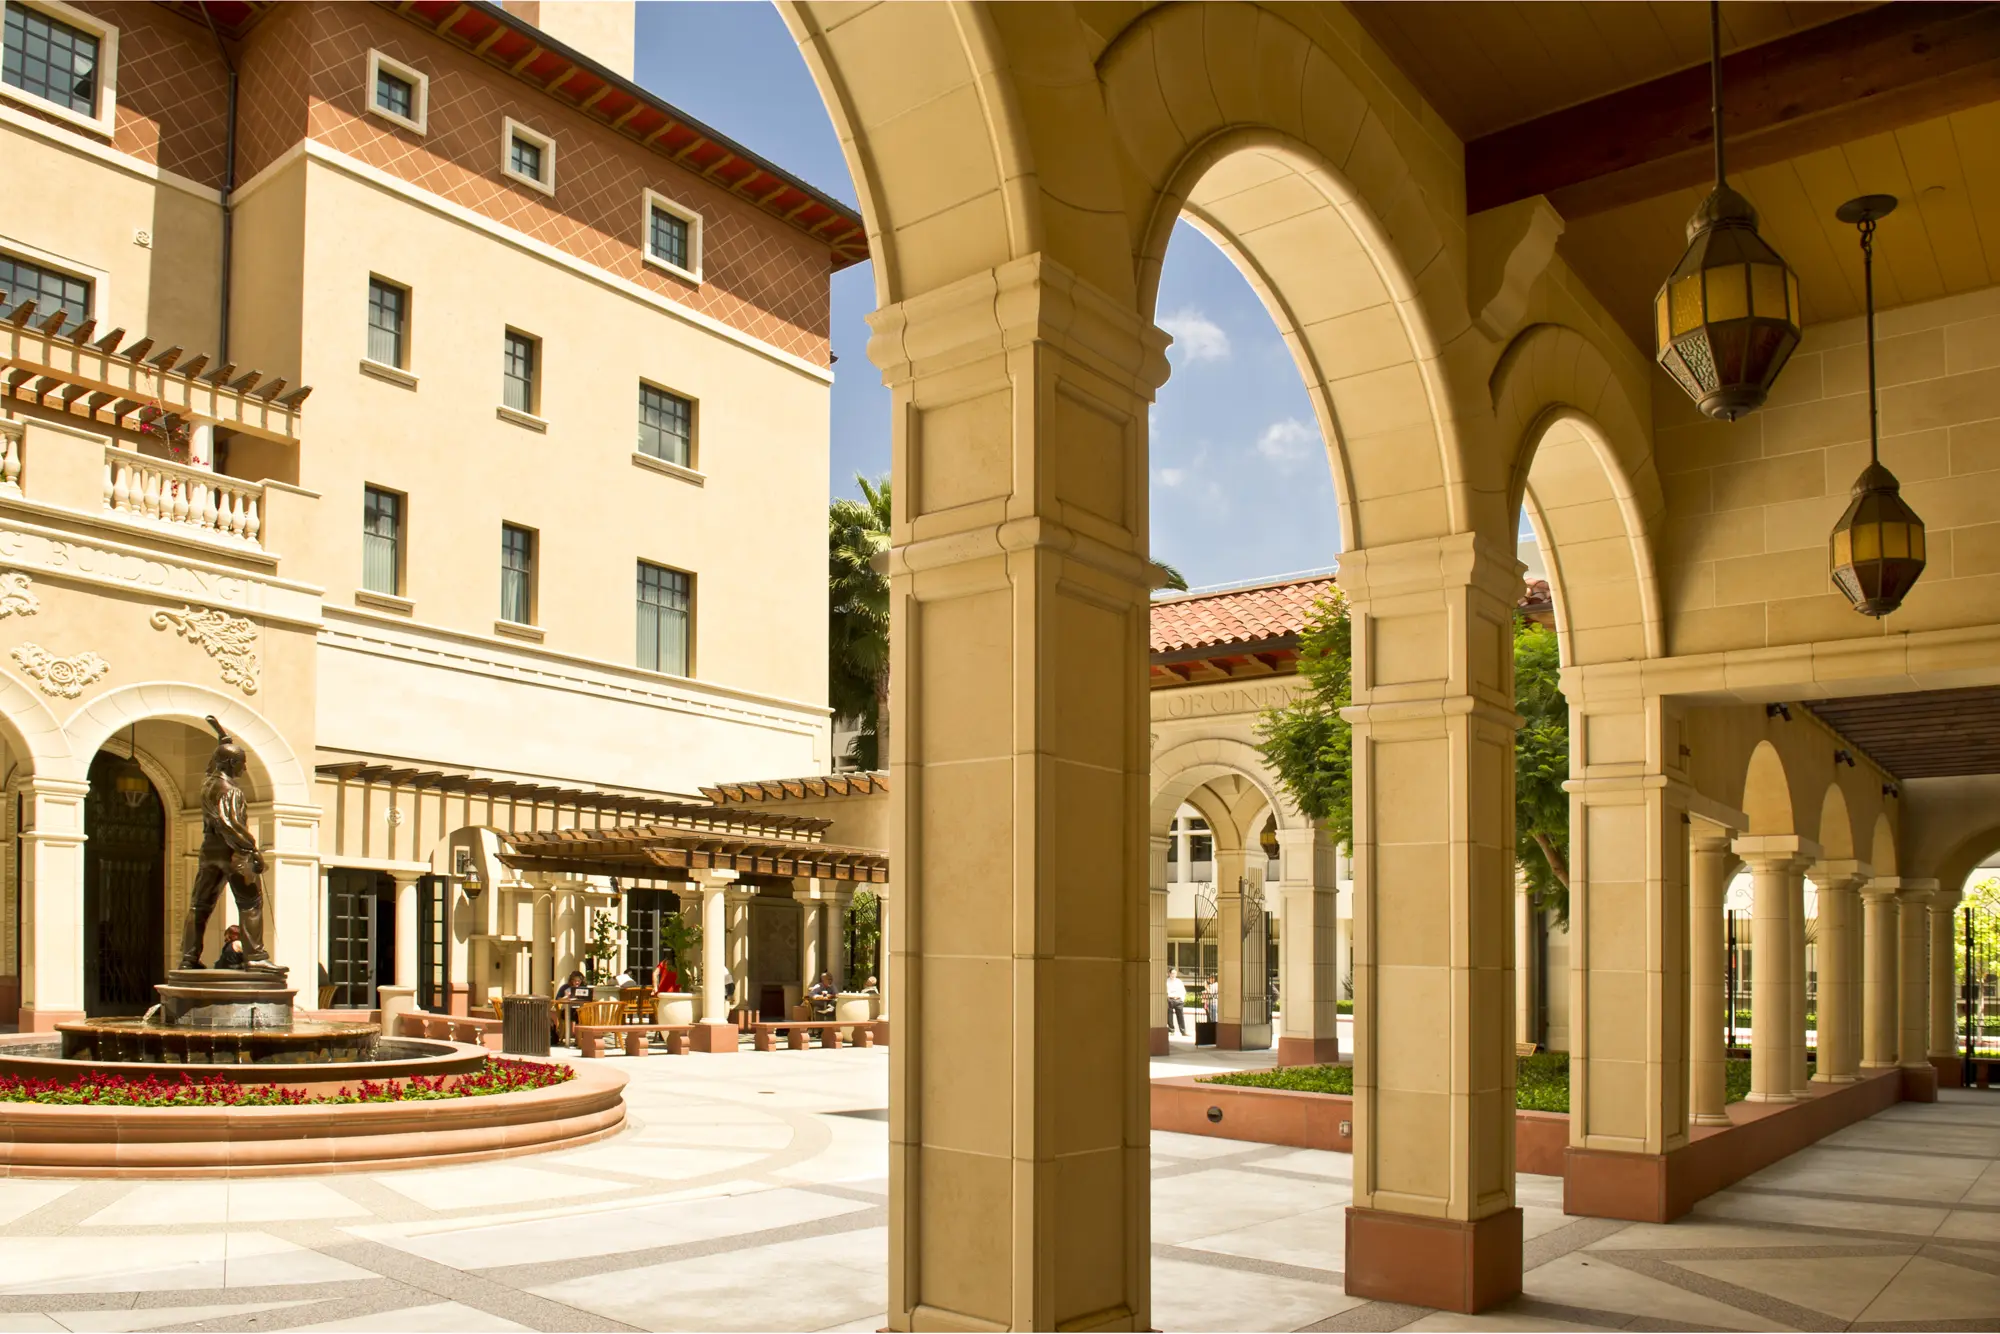 <i>Architectural photography of Tutor Campus Center at USC. Architects AC Martin designed the 193,000 square feet structure which contains lounges, study areas, meeting rooms, food service, student forum, and outdoor space. </i><span>USC</span>